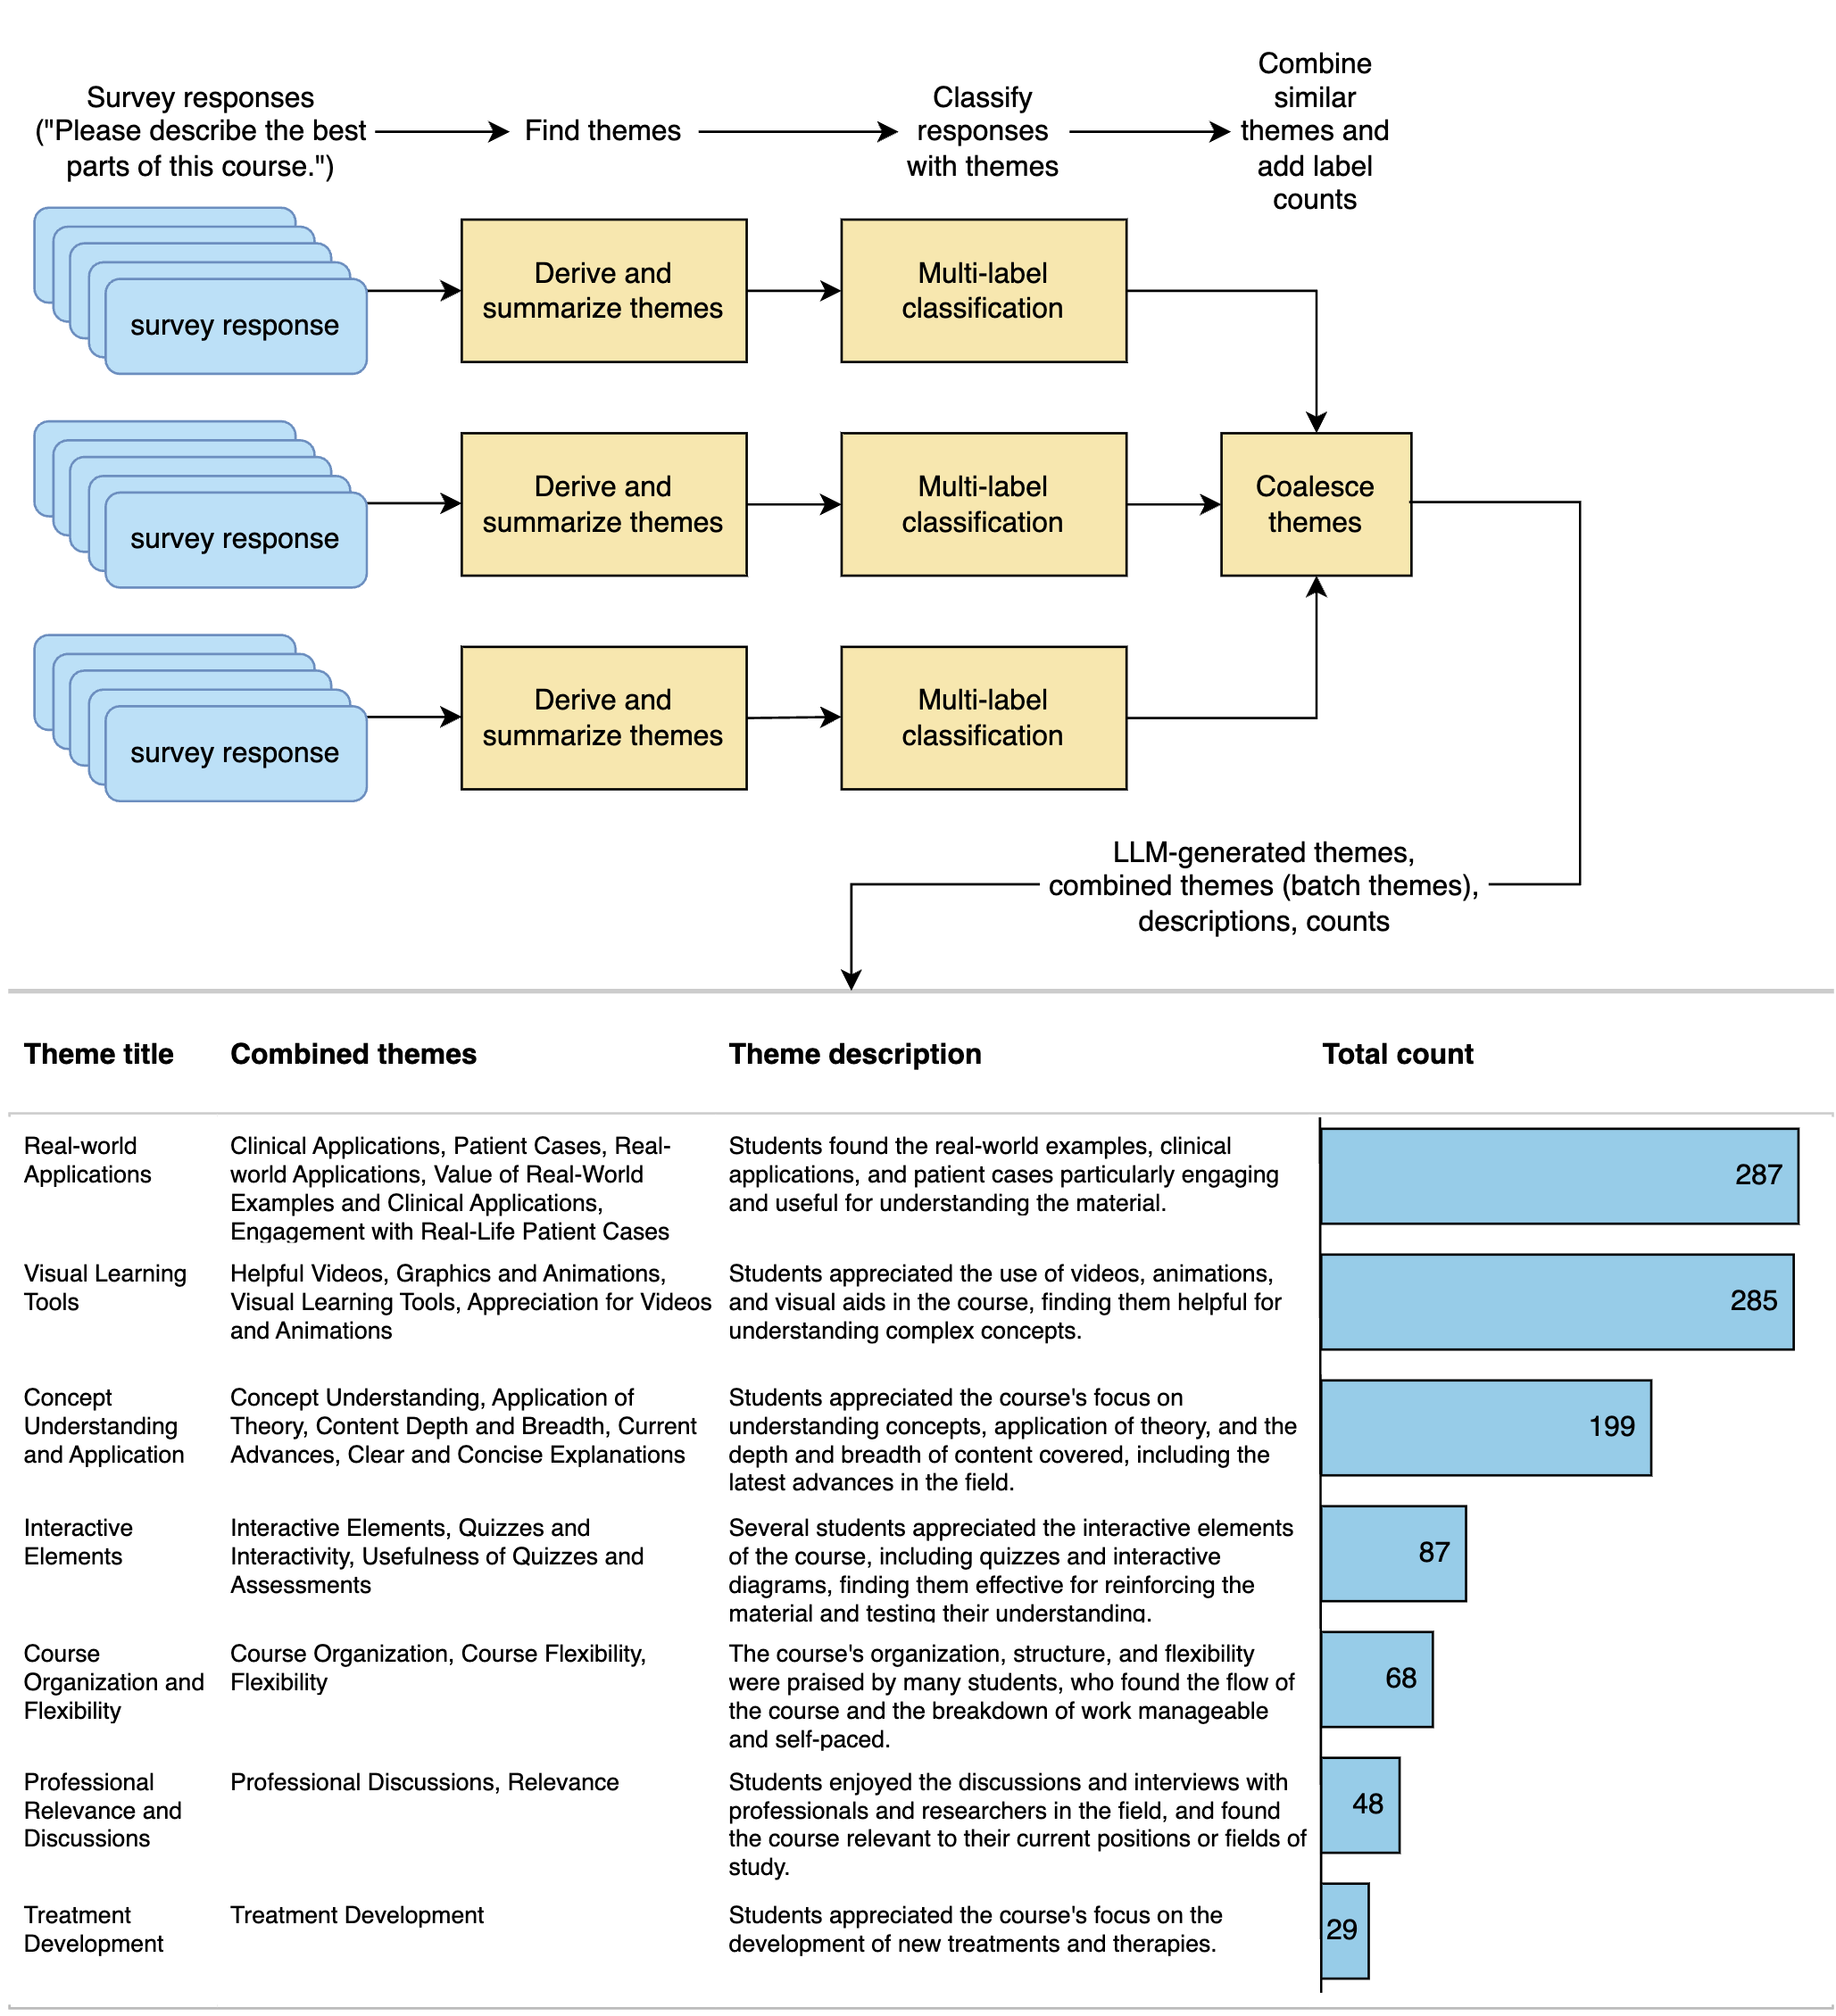 A Large Language Model Approach to Educational Survey Feedback Analysis